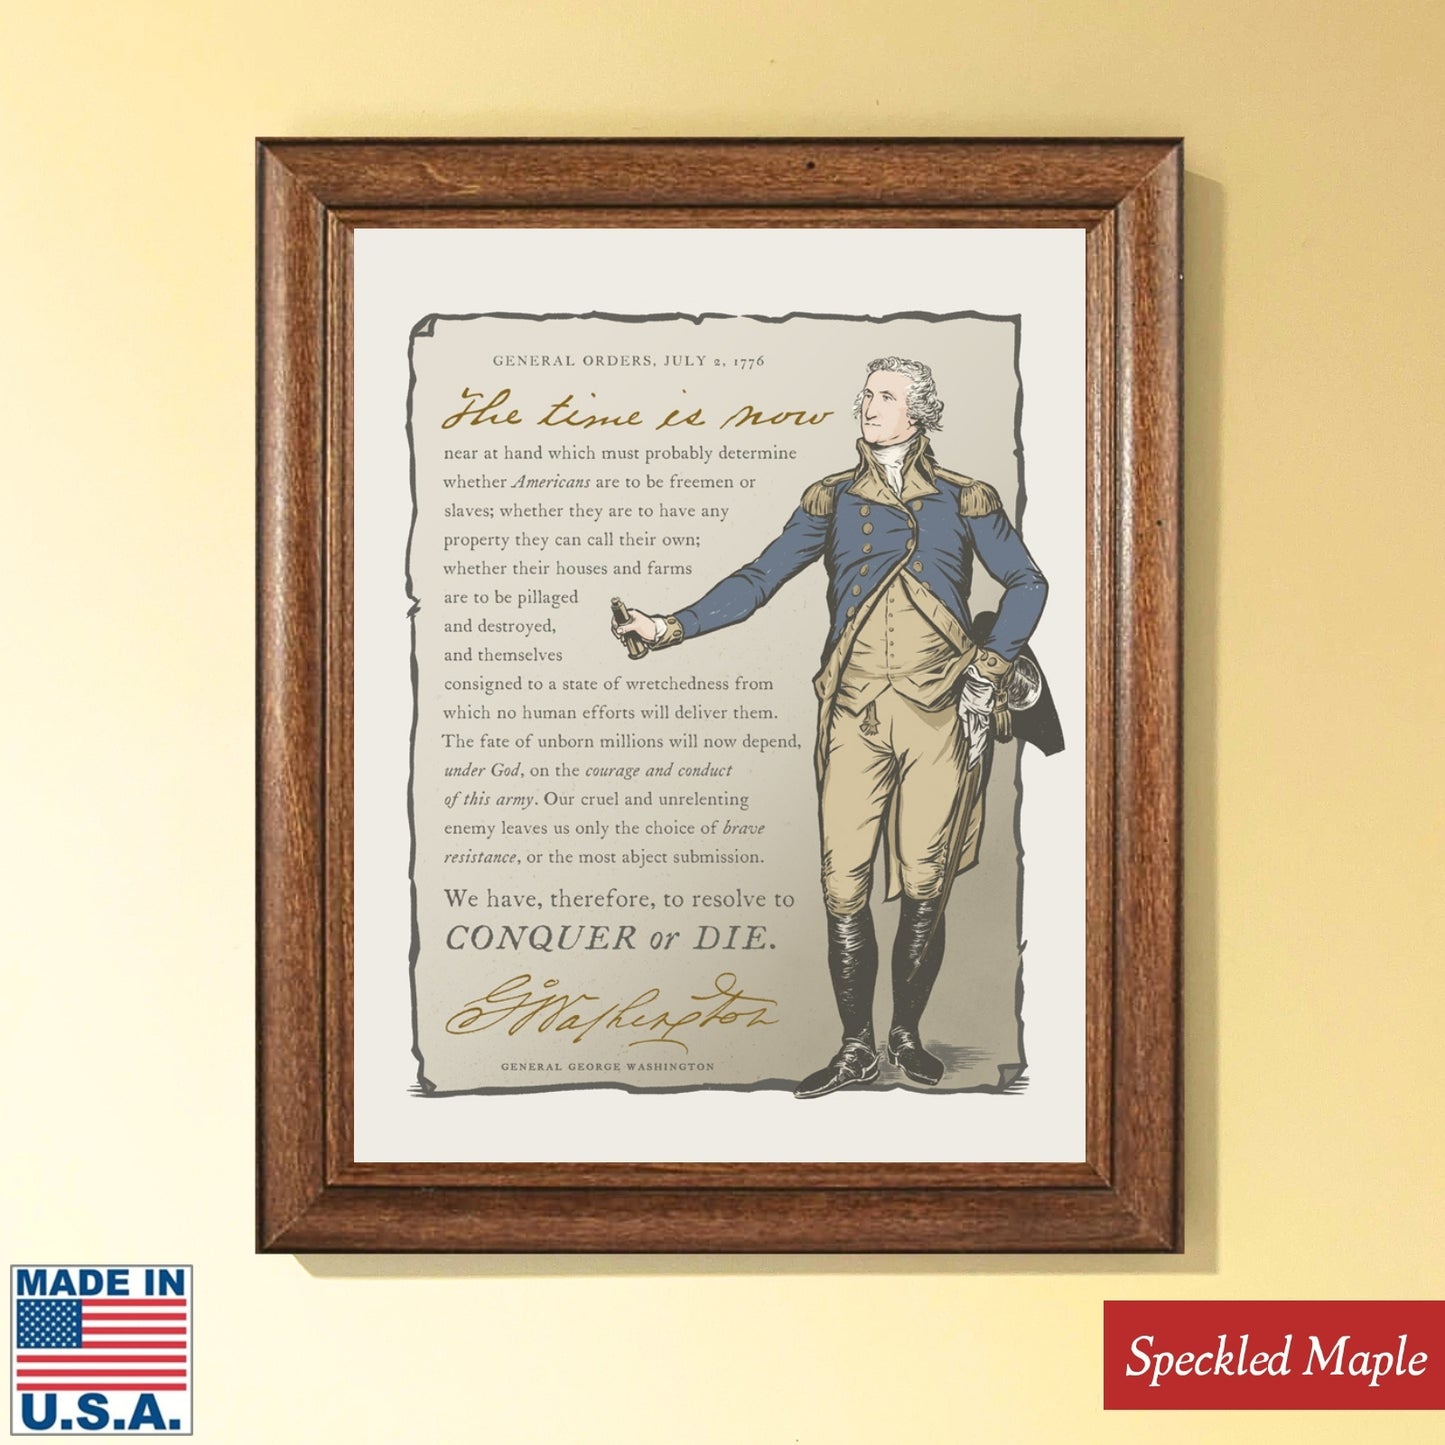 "Conquer or Die" — George Washington's General Orders framed print made in America